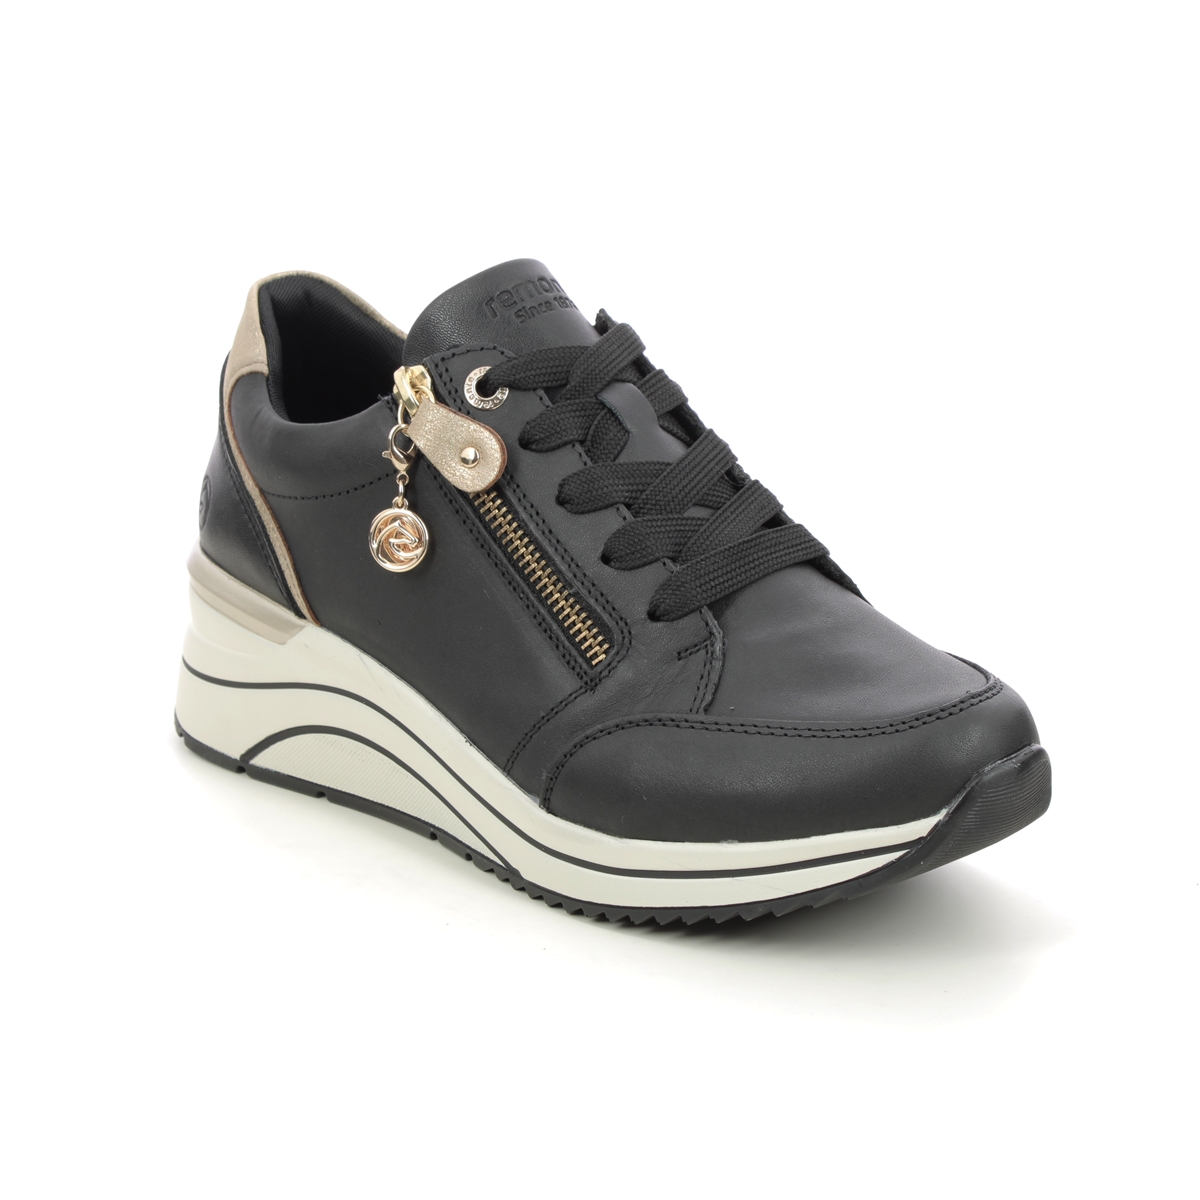 Remonte Ranzip Wedge Black Leather Womens Trainers D0T03-01 In Size 37 In Plain Black Leather